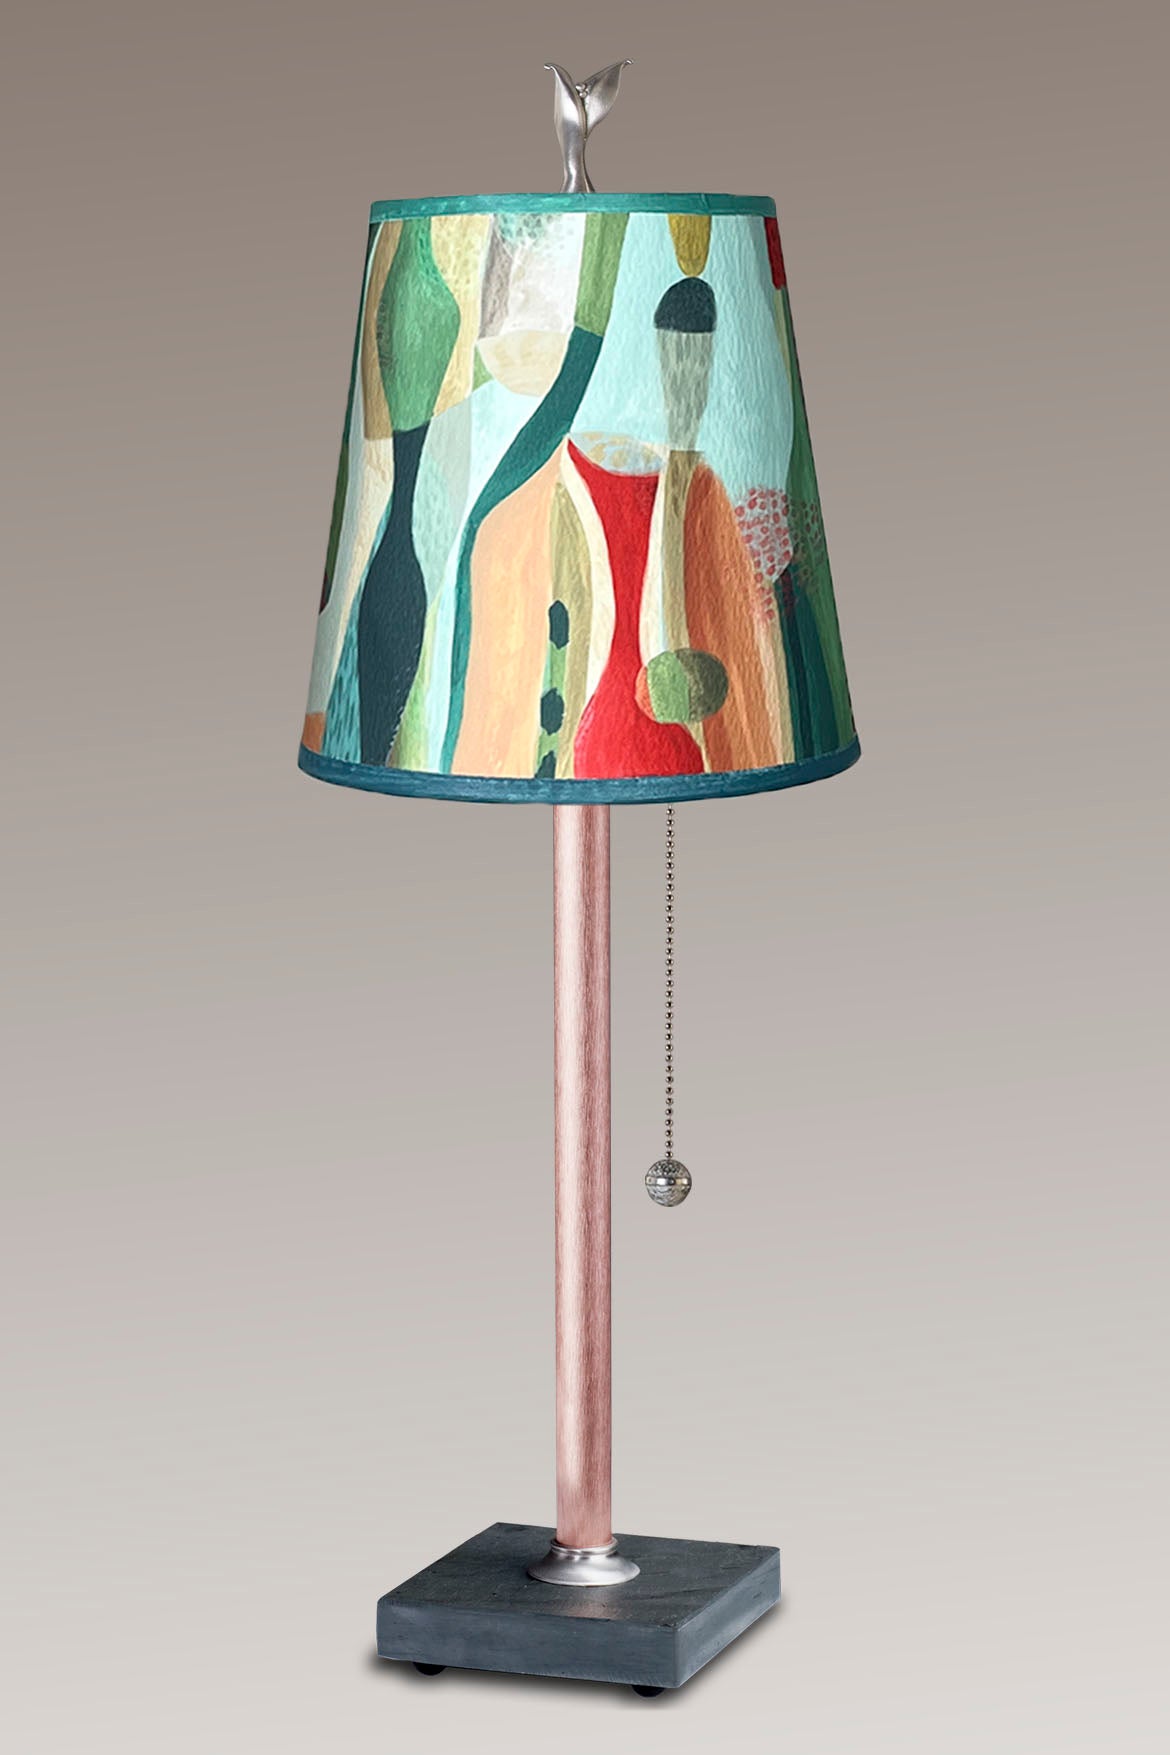 Janna Ugone & Co Table Lamp Copper Table Lamp with Small Drum Shade in Riviera in Poppy